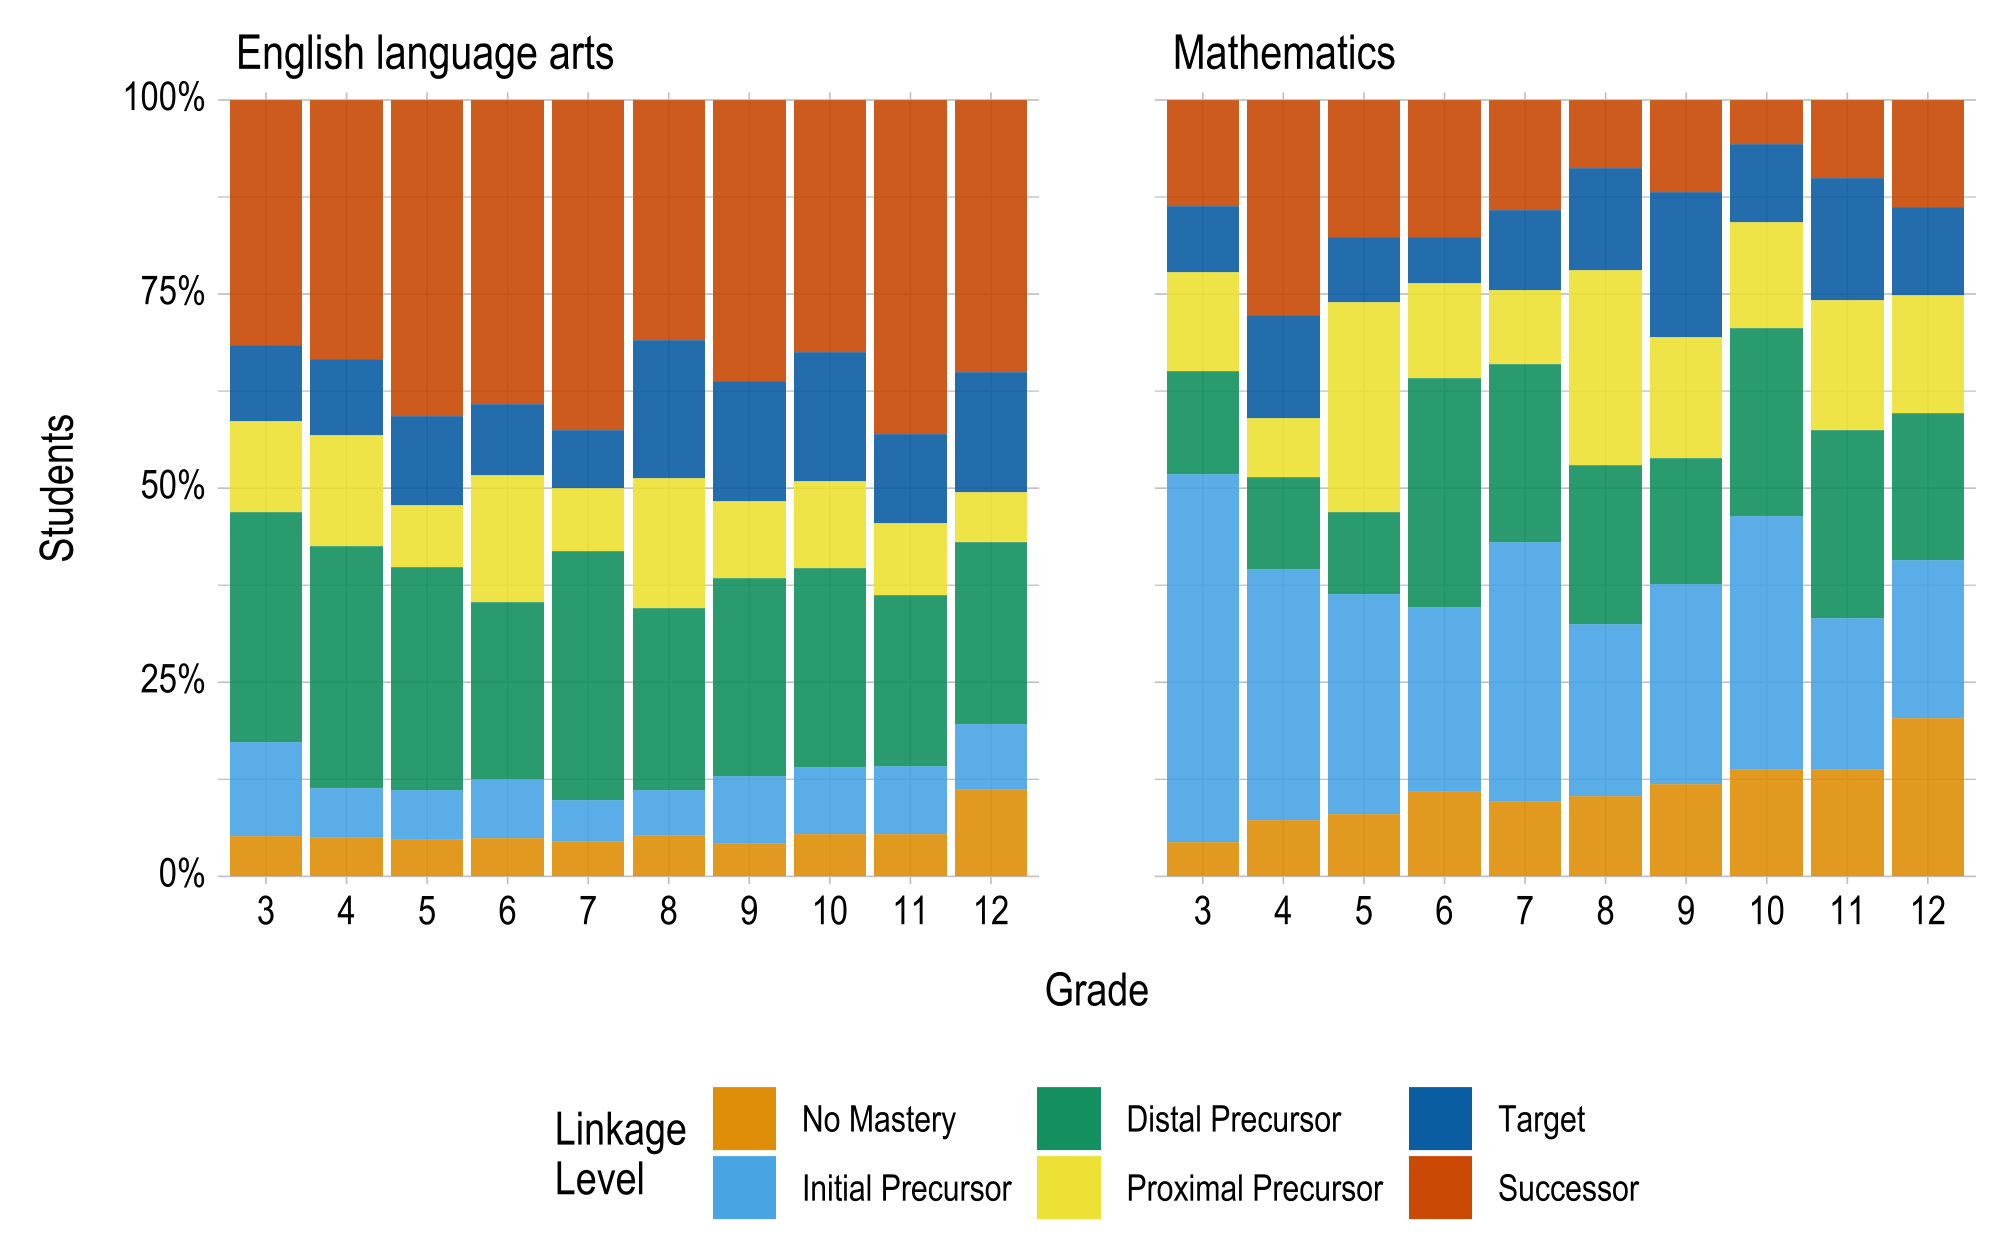 Two sets of stacked bar charts for ELA and mathematics. There is a bar chart for each grade, and the stacks within each bar chart represent a linkage level and the percentage of students who mastered that linkage level as their highest level. The highest linkage level for most students was below the Target level.